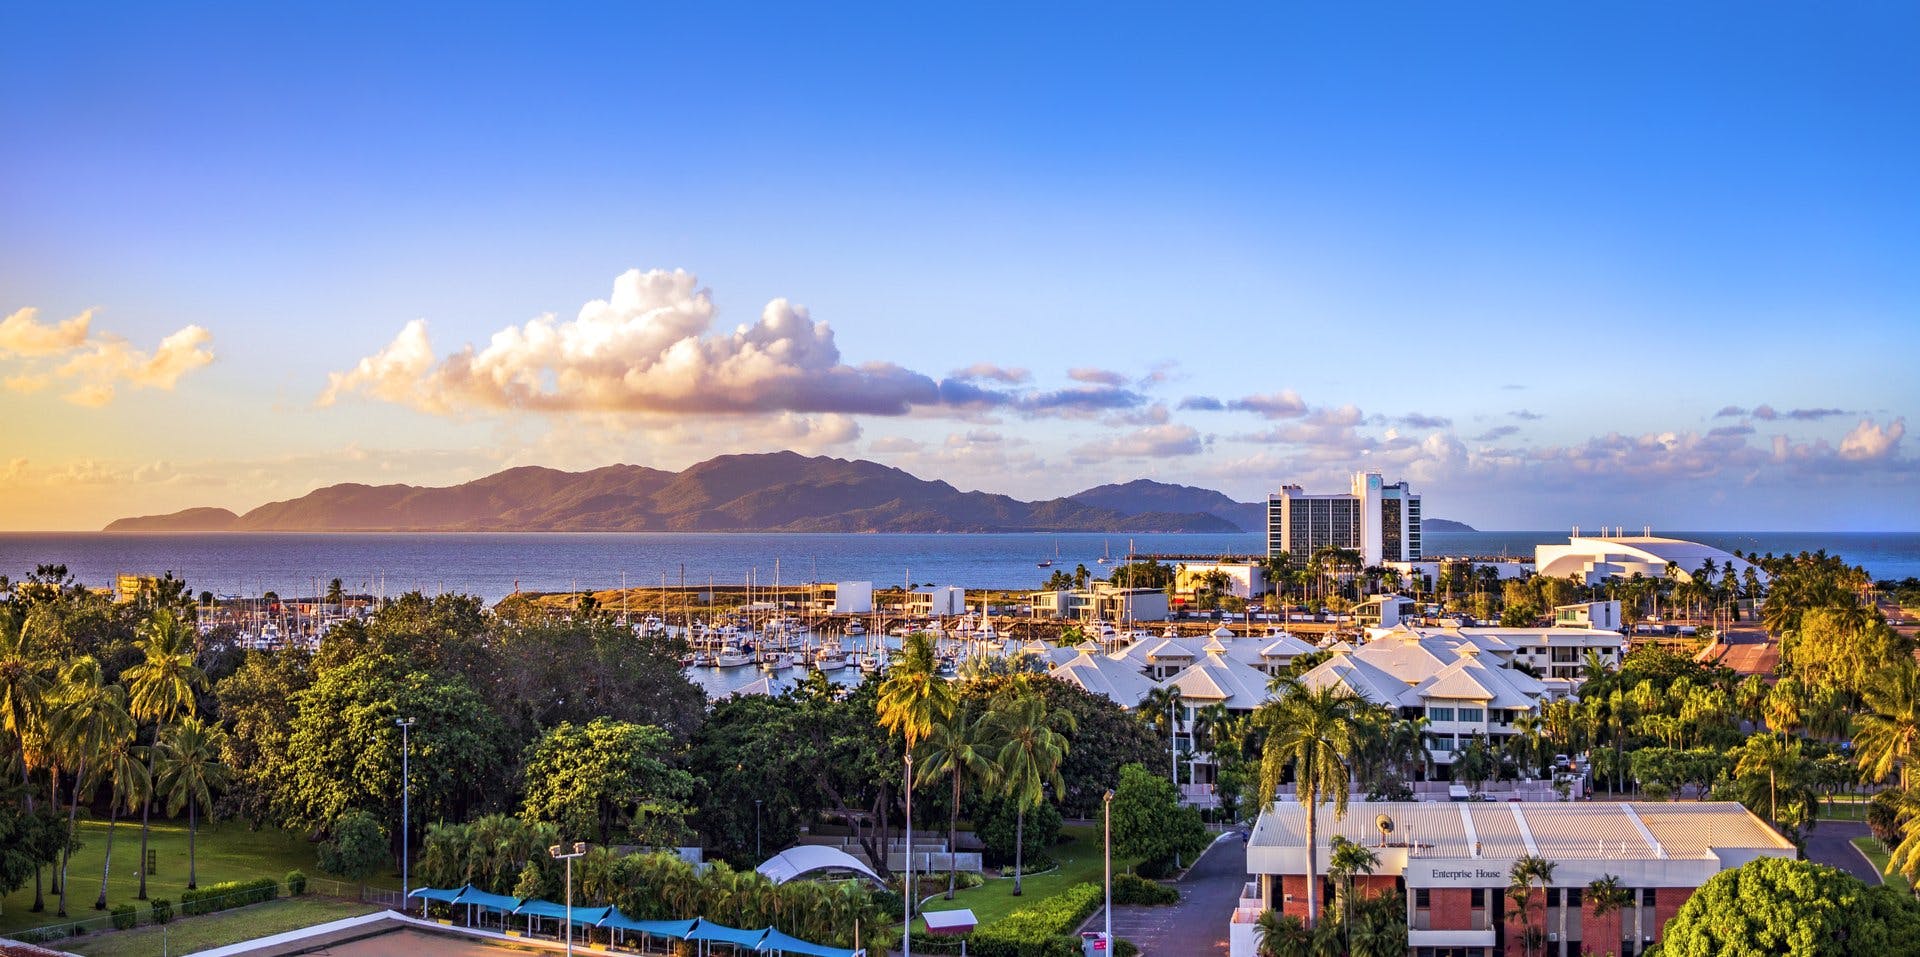 Townsville Multisport World Championship to be held in August 2022